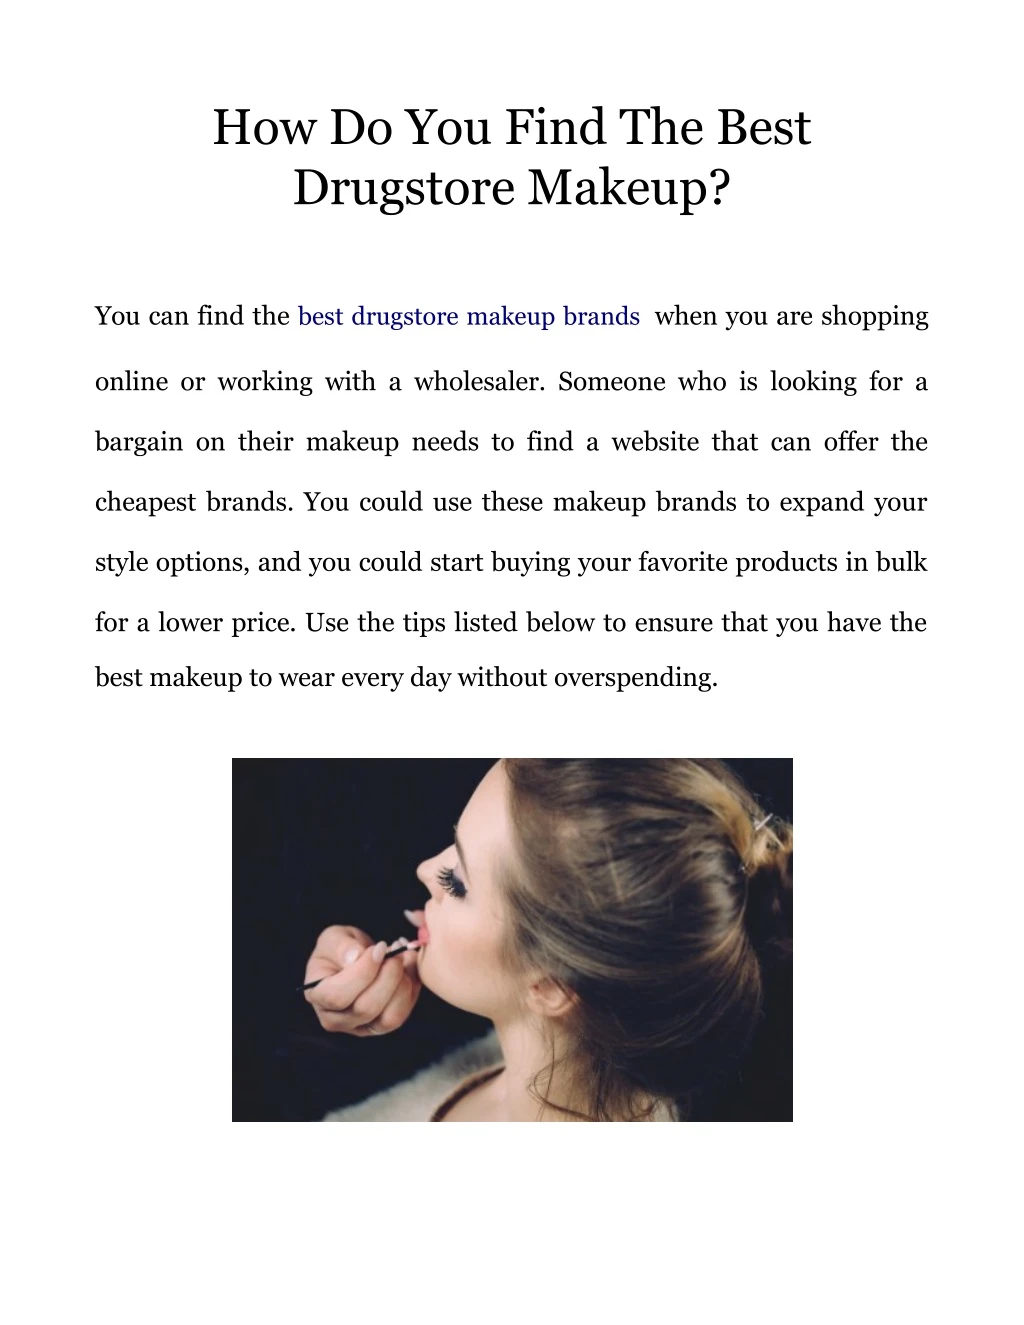 how do you find the best drugstore makeup